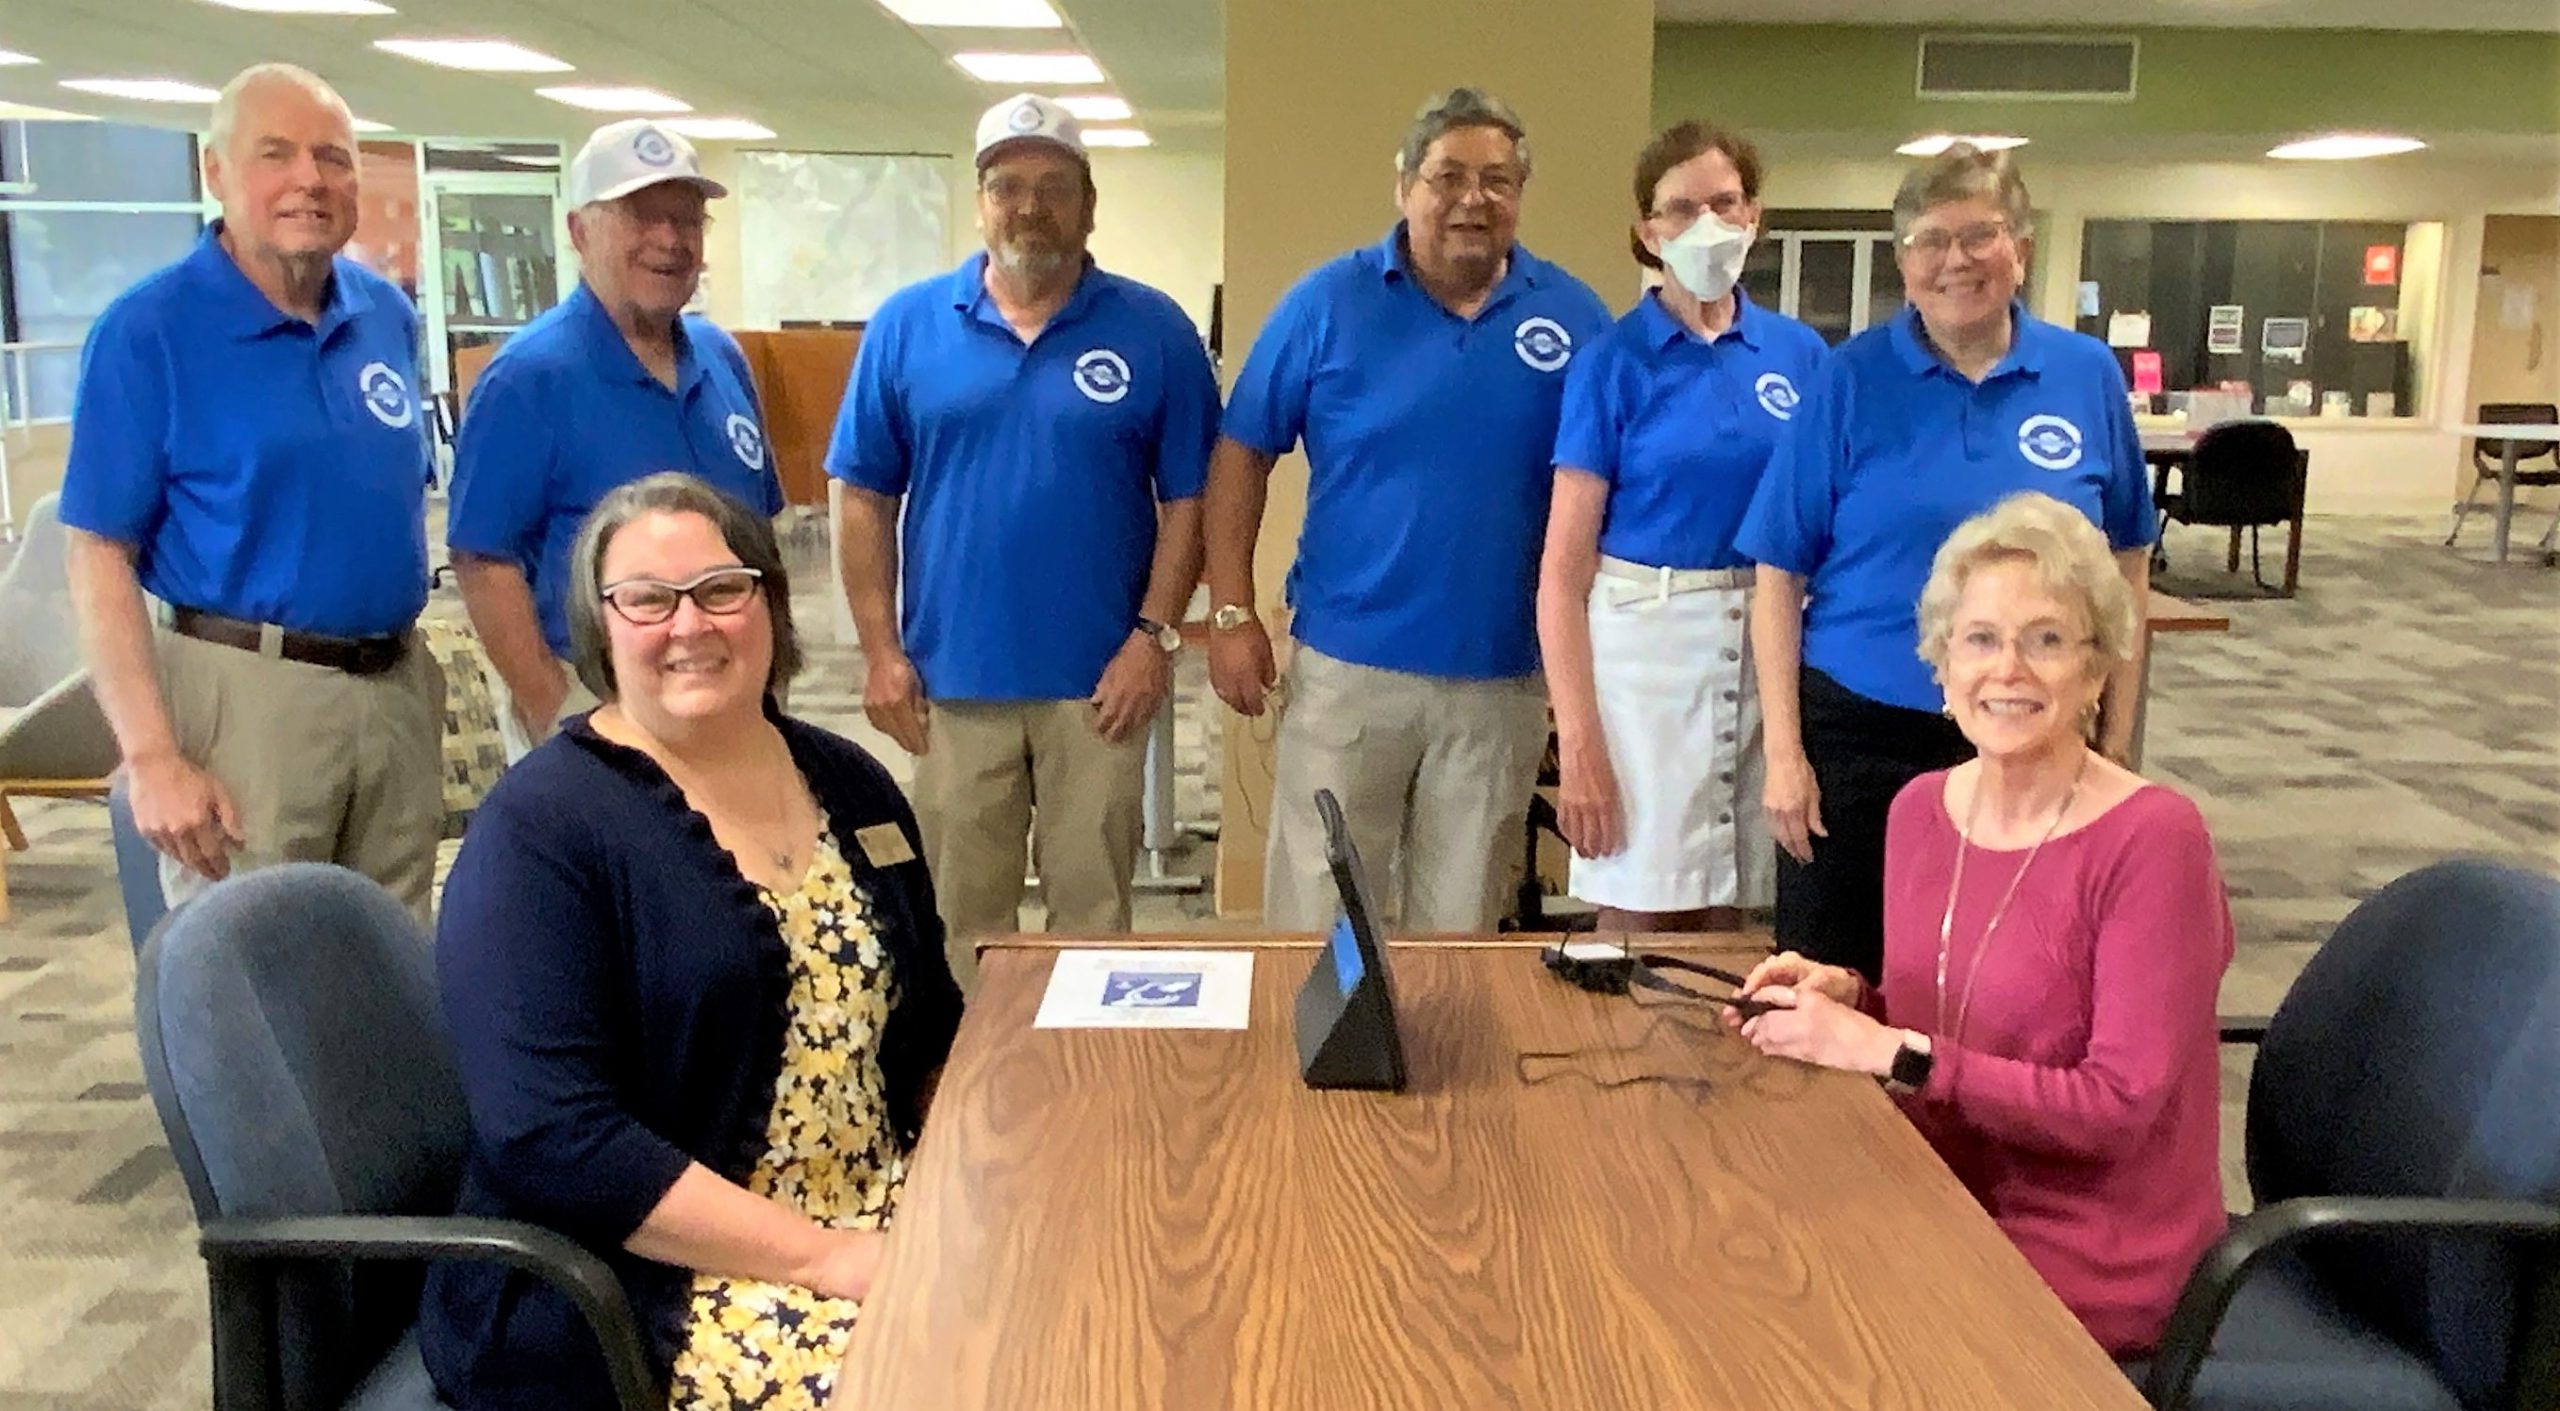 Tammy Kuhn-Schnell and Dr. Charlotte Warren seated at a table with the hearing loop device, and members of the Sertoma Club standing behind